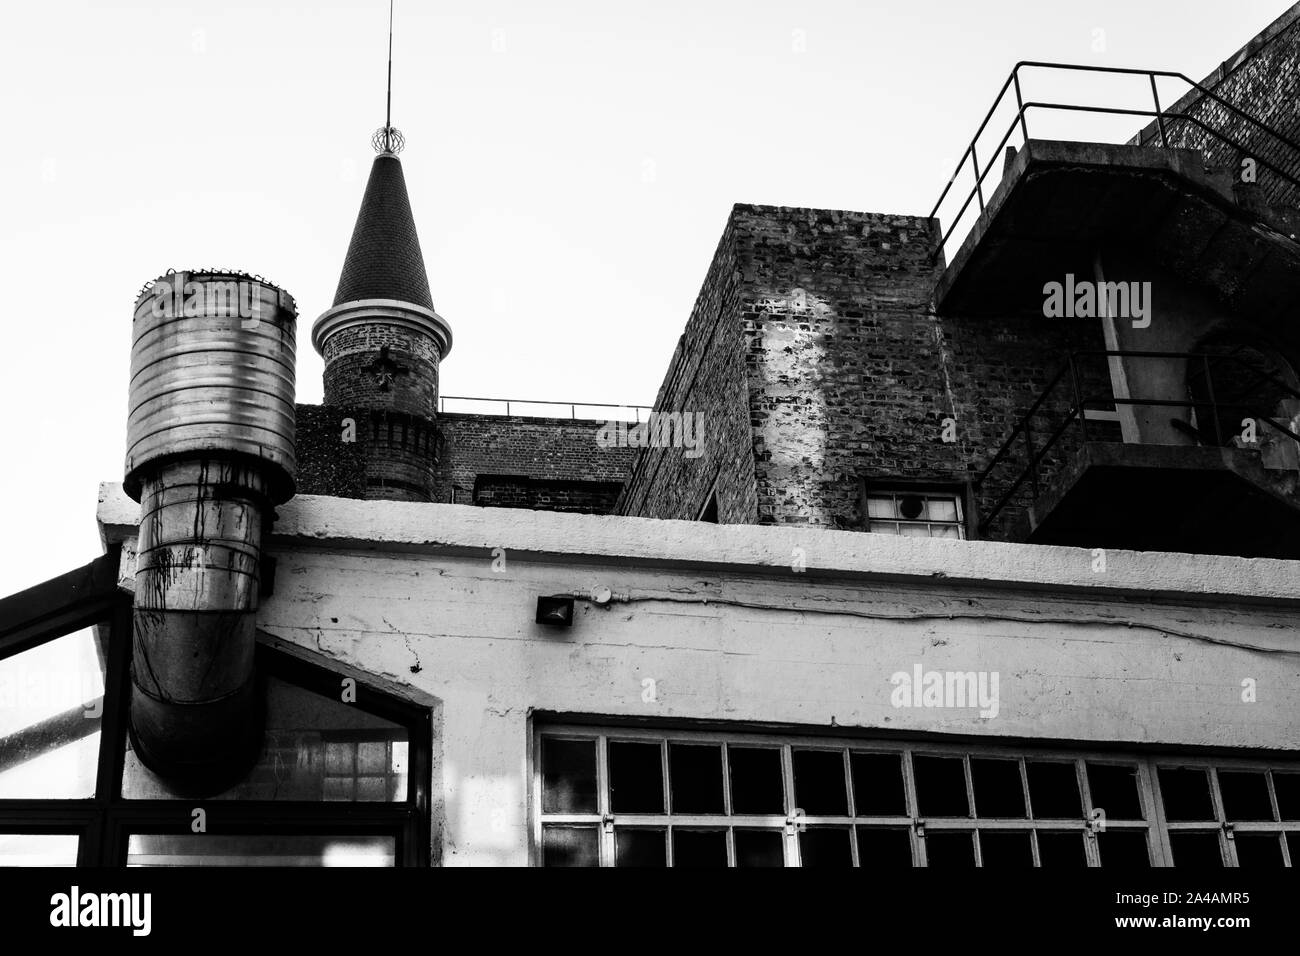 The Old Castle Brewery built in 1901 in the Cape Town city suburb of Woodstock in South Africa Stock Photo